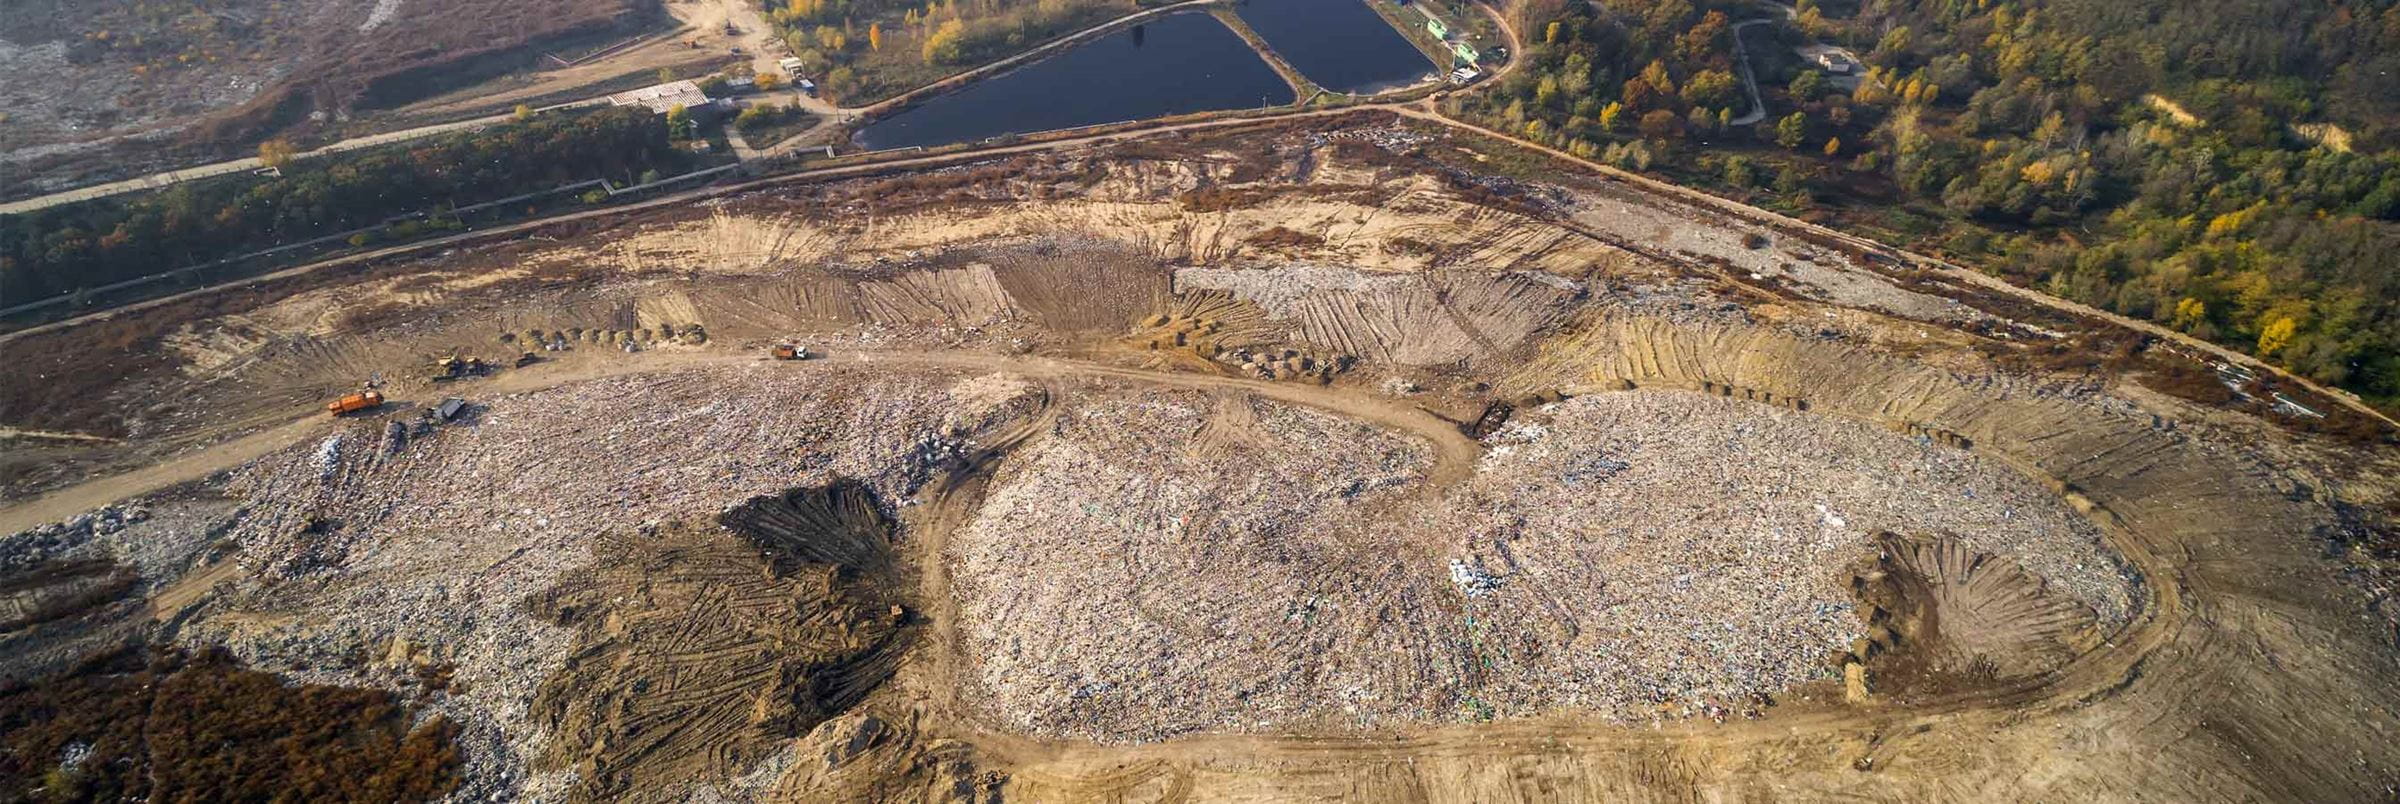 Overview of large landfill site